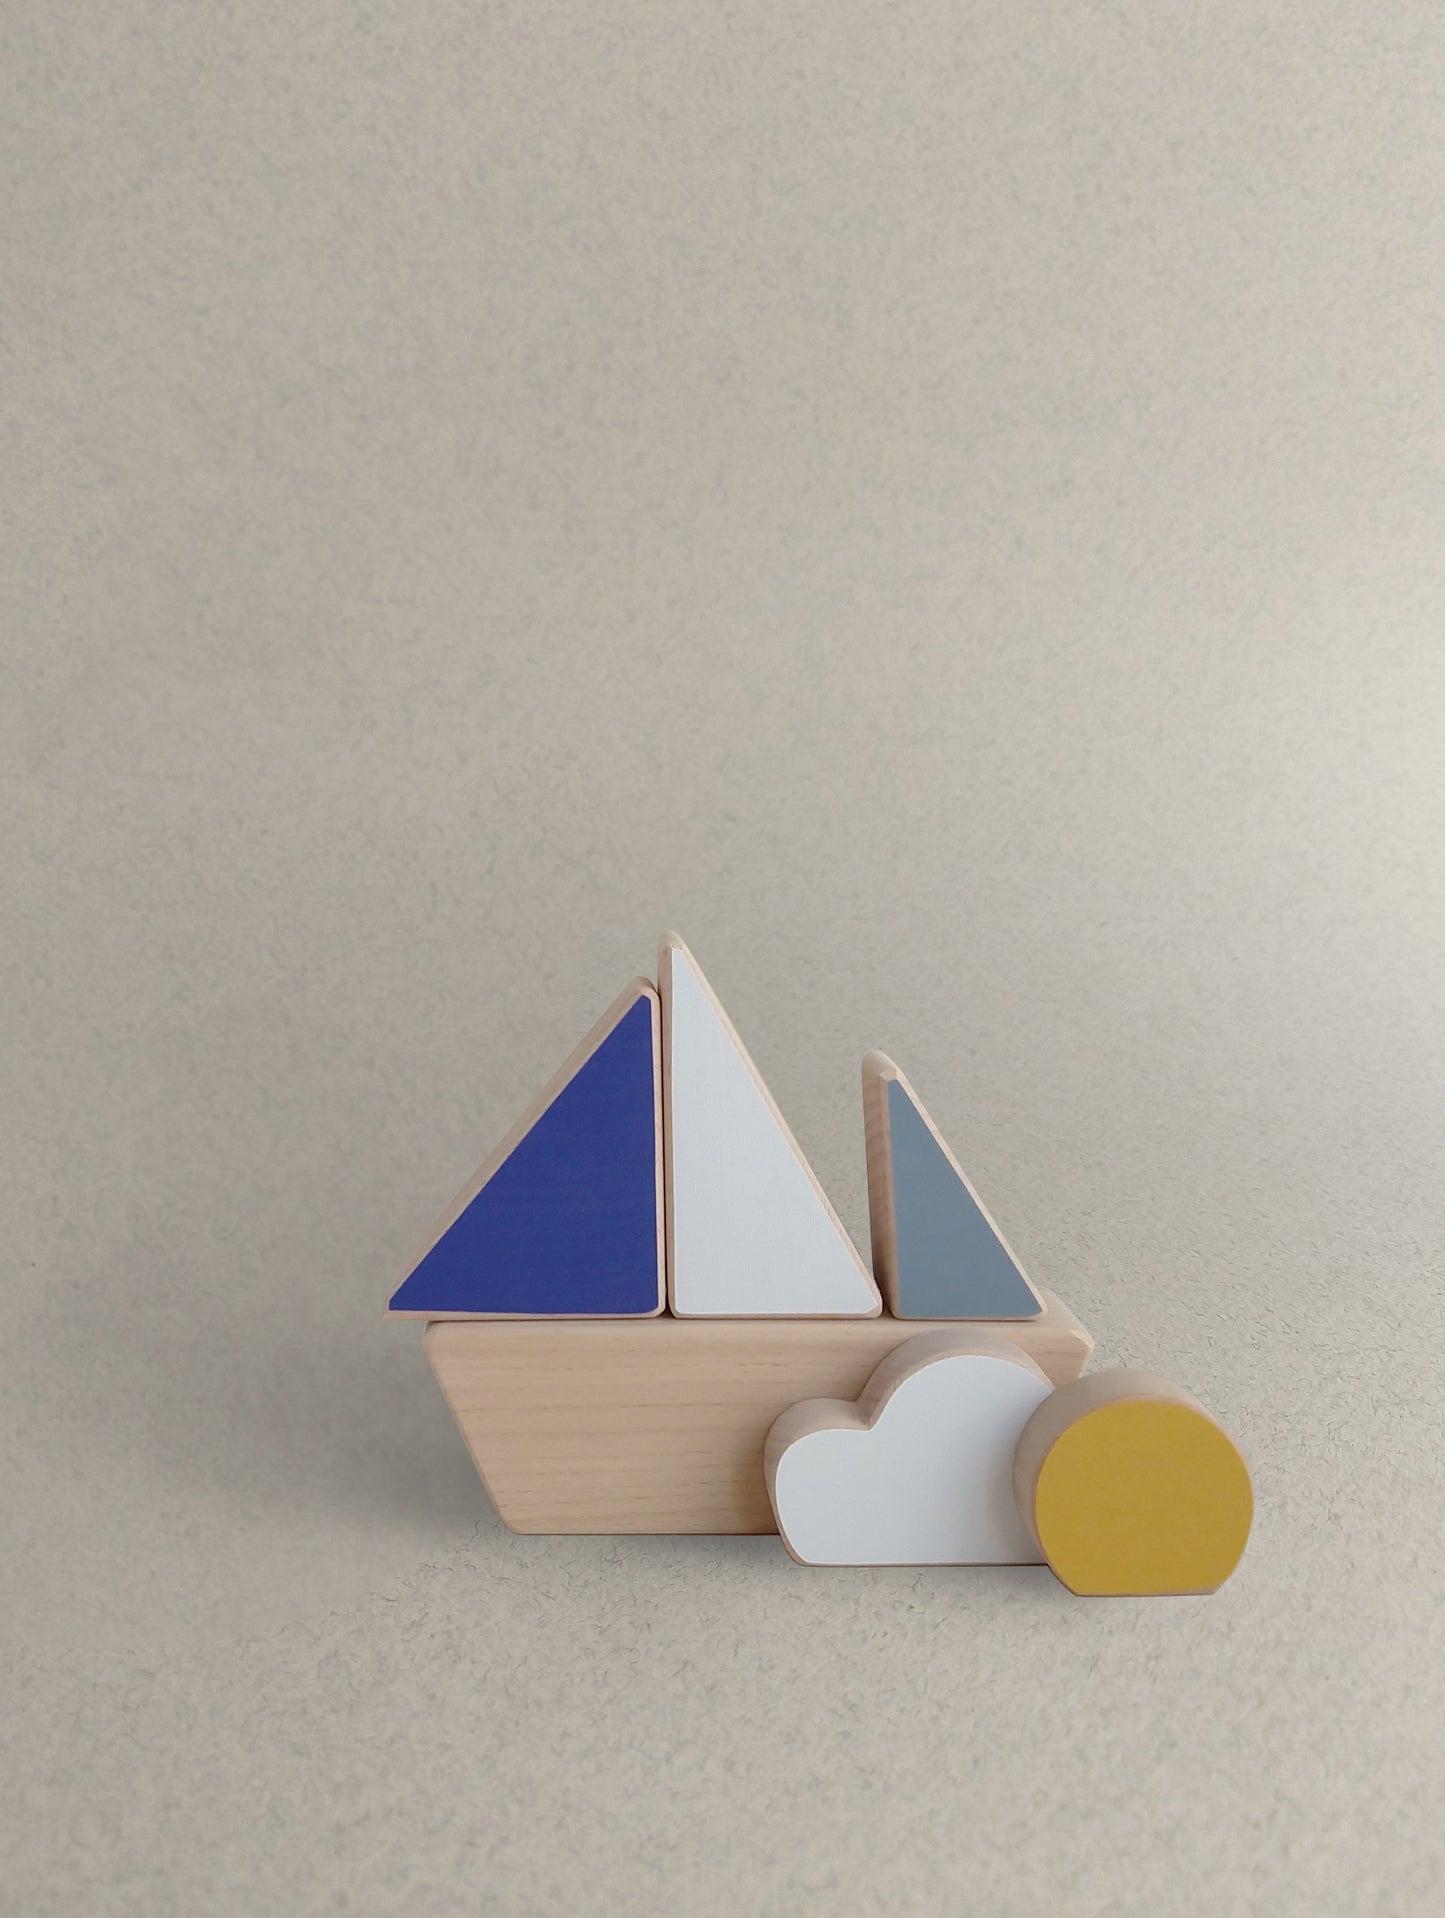 The minimalistic stacking boat toy